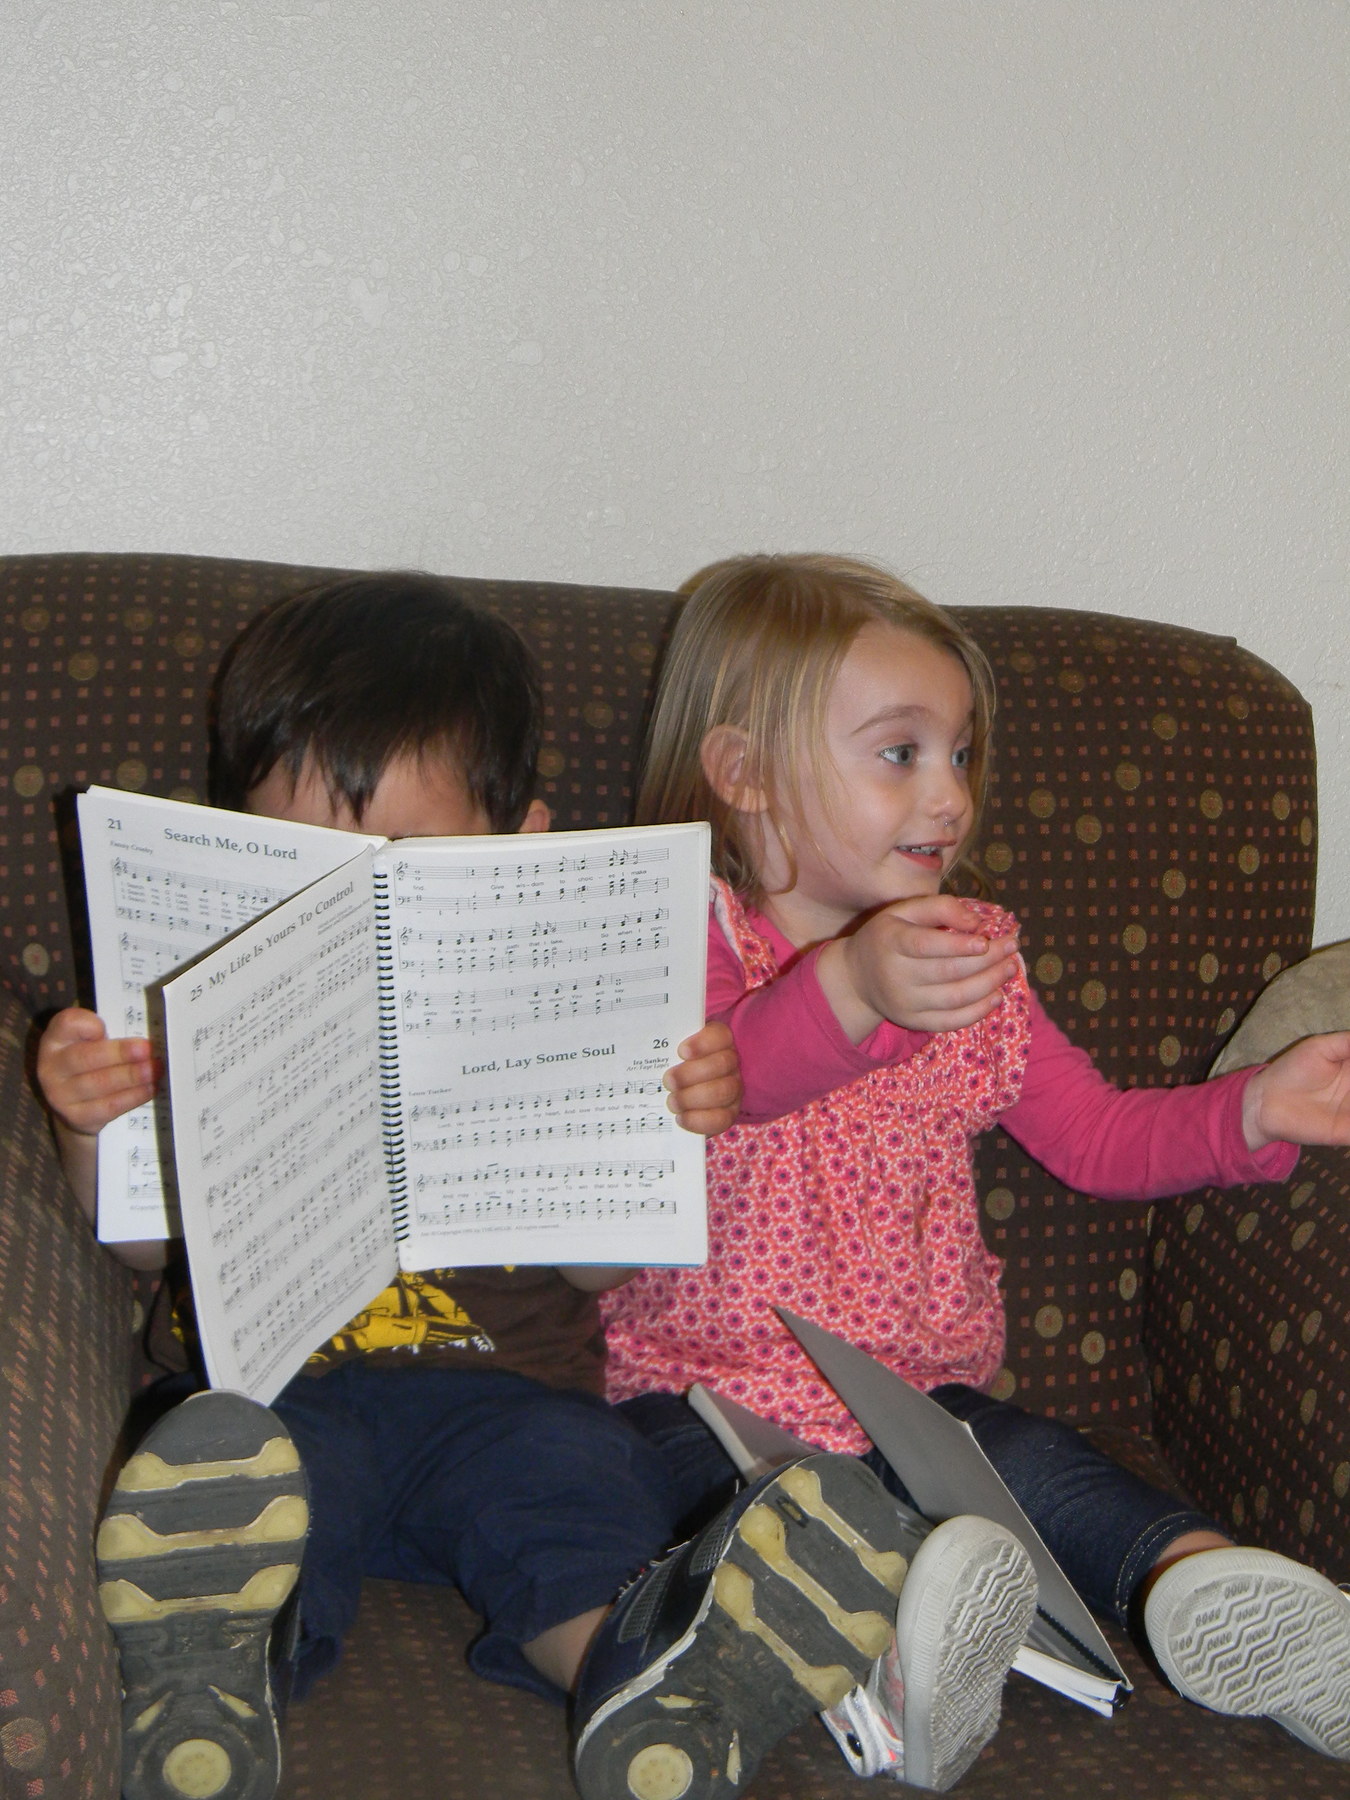 Judah and his BFF Selah checking out some worship hymns